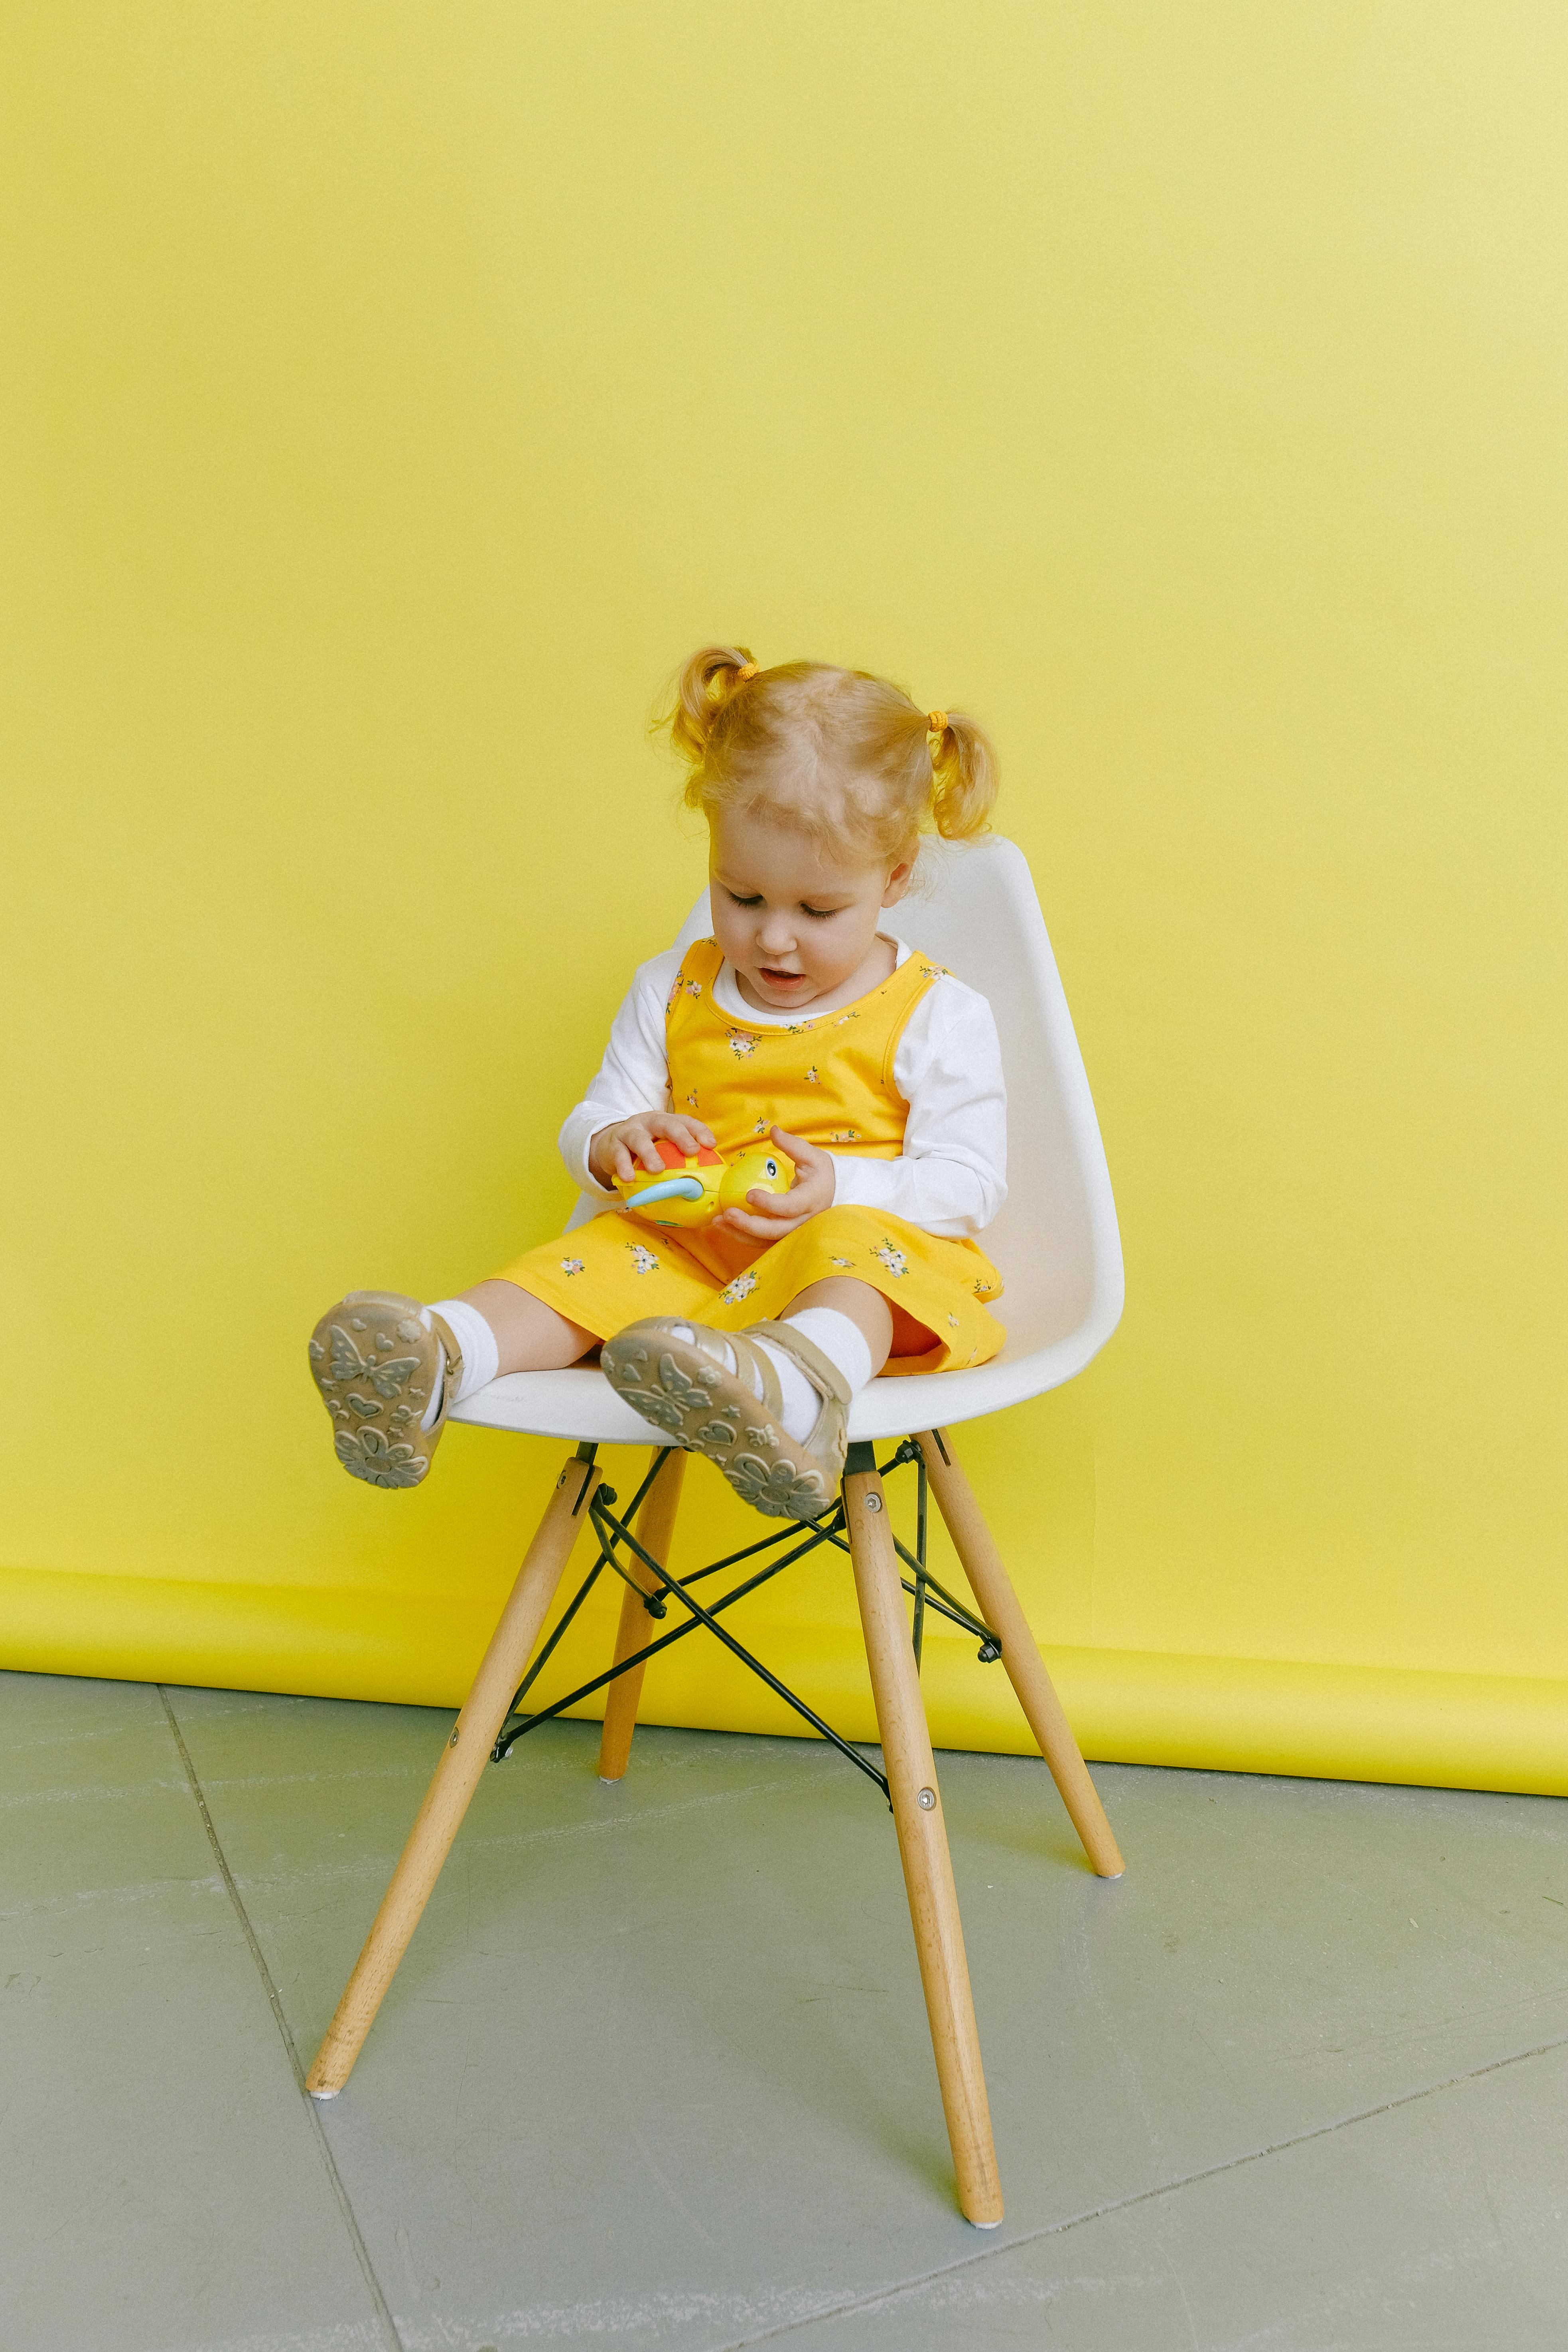 Baby Girl Sitting On Chair Free Stock Photo